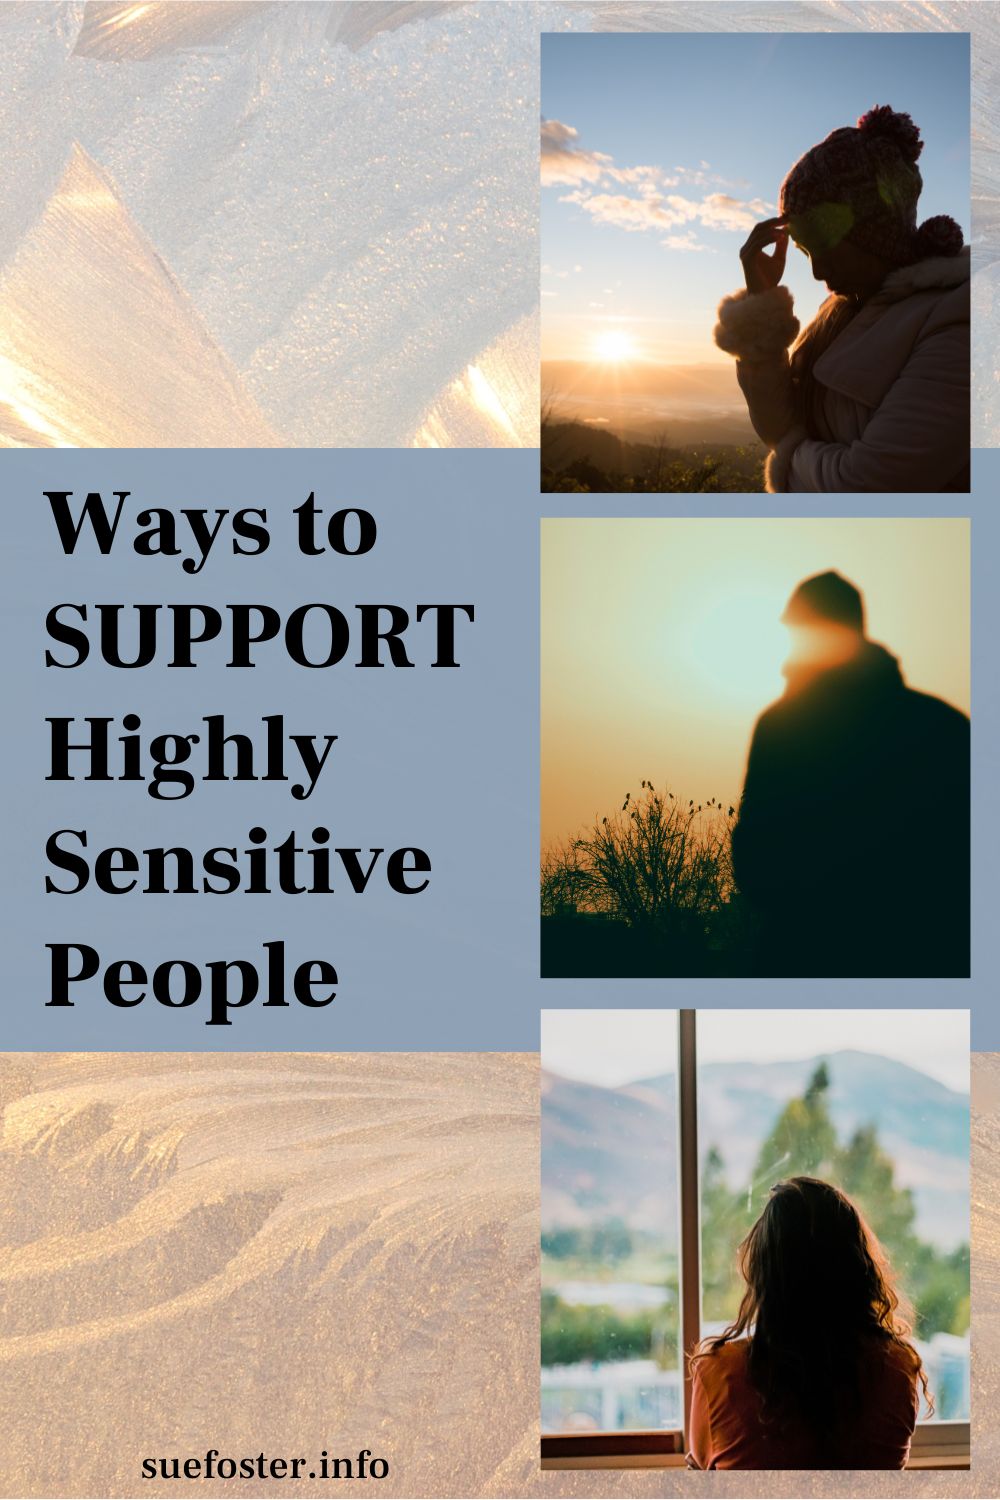 If you’re highly sensitive, you will relate to these points straight away.